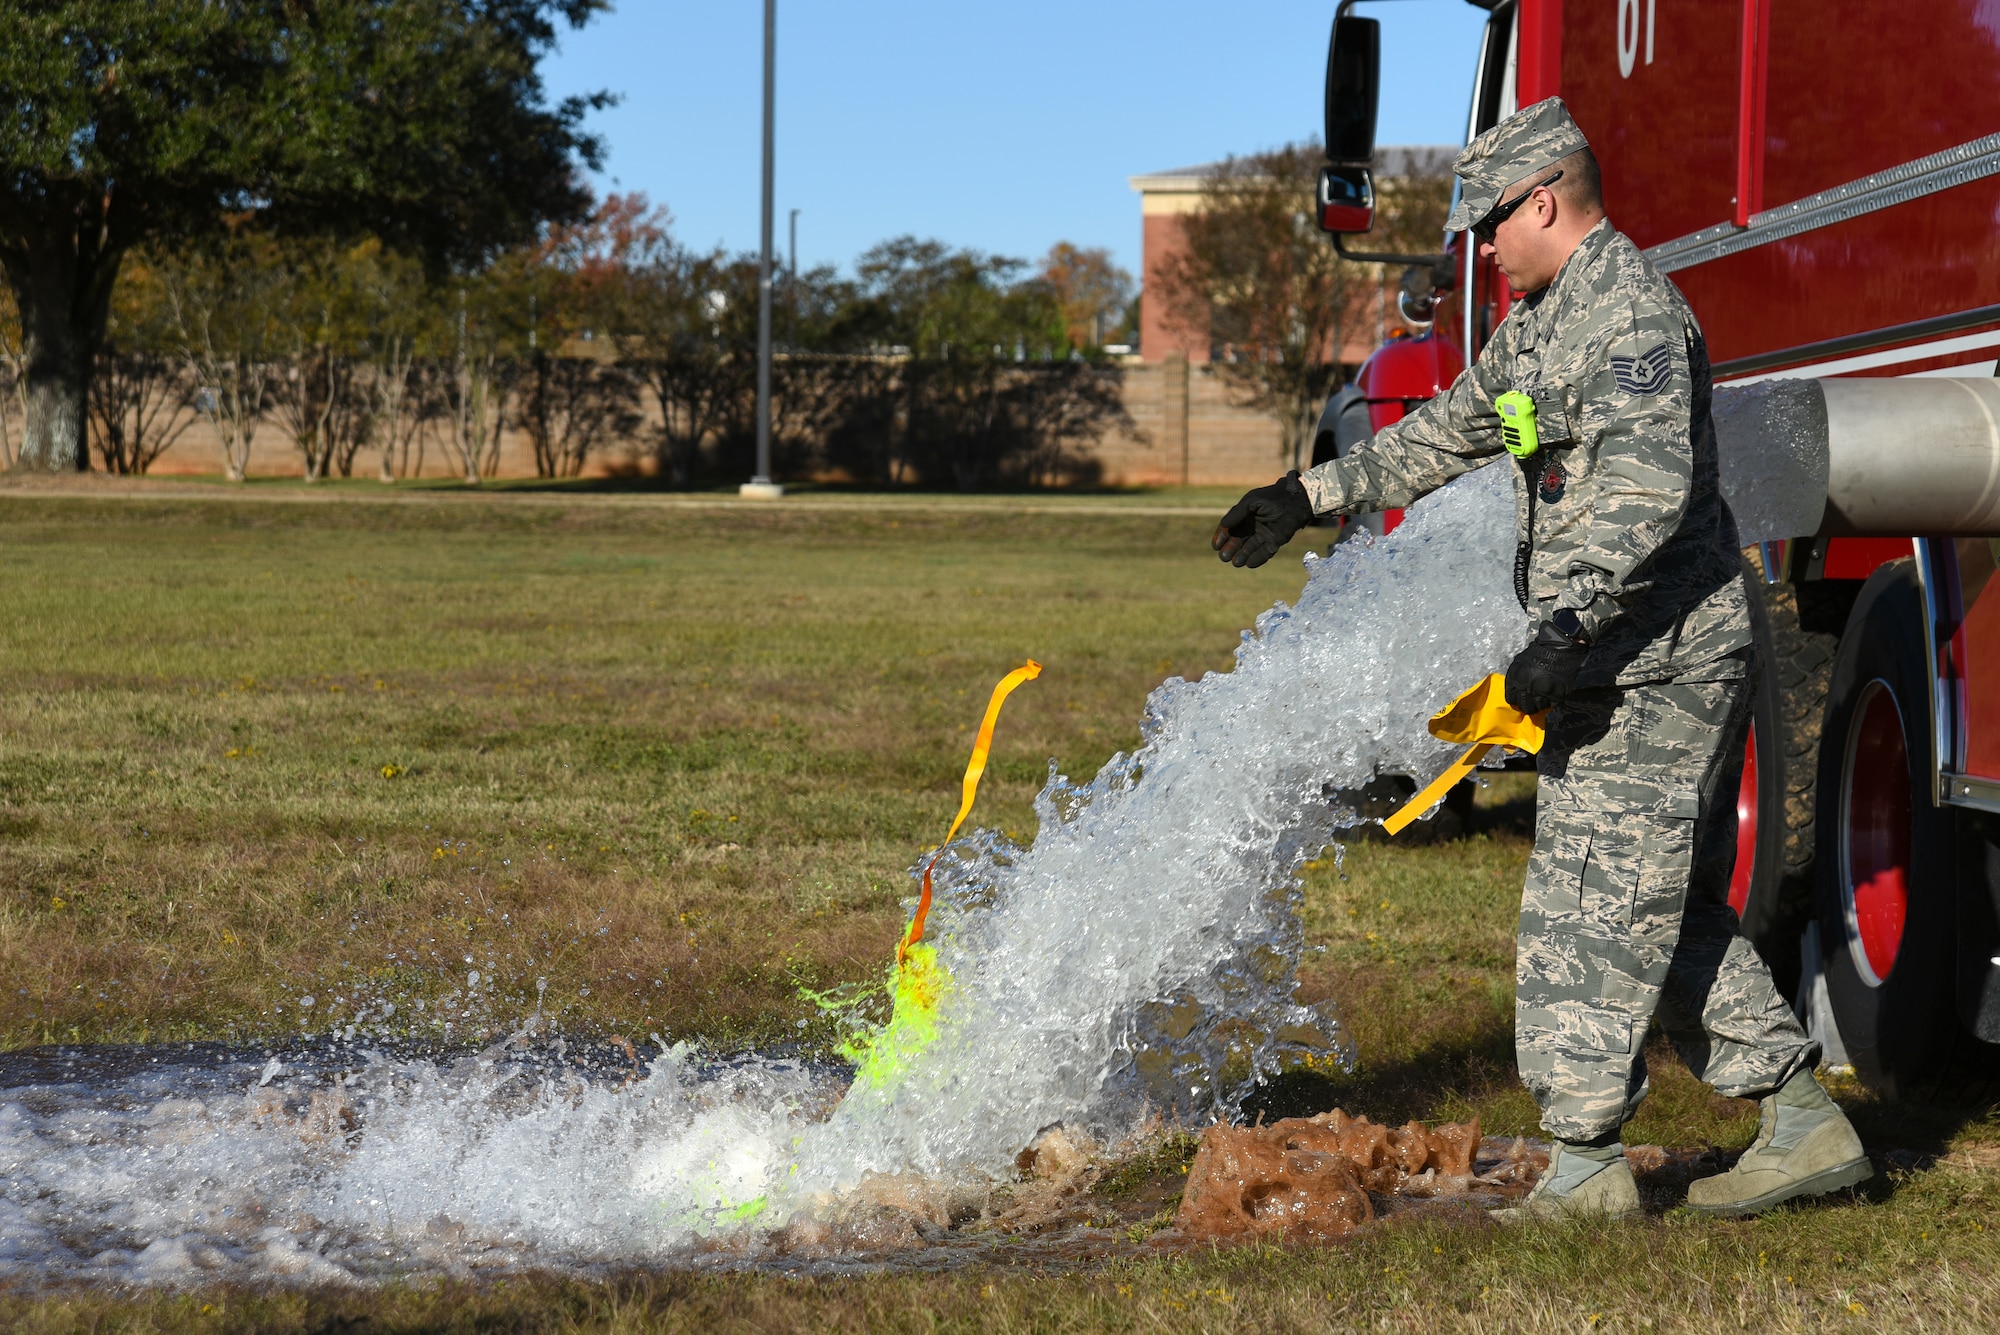 U.S. Air Force Tech. Sgt. Larry Diaz, 20th Civil Engineer Squadron noncommissioned officer in charge of training, tosses a dye packet into water being emptied from a fire truck during a major accident response exercise at Shaw Air Force Base, South Carolina, Nov. 17, 2017.